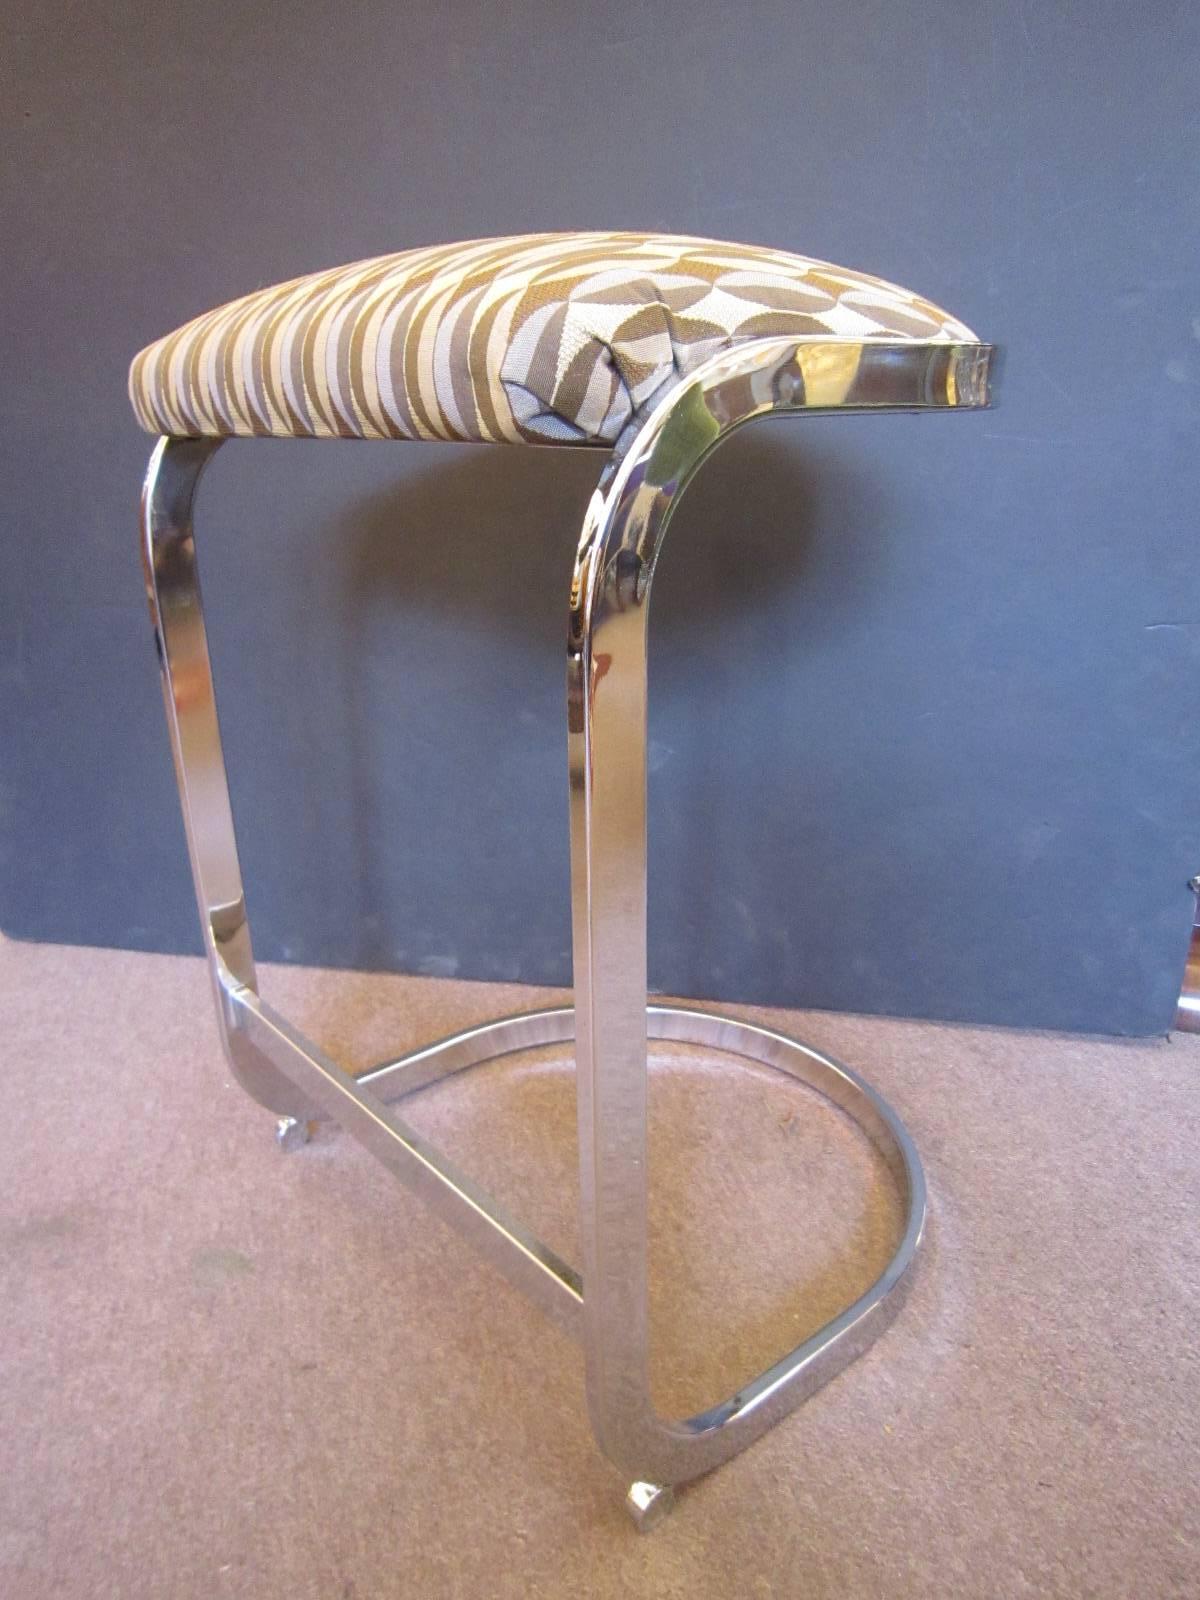 A set of three Design institute of America chrome cantilever bar stools.
These are counter height and can also artfully be used in the center island of a Modern, Mid-Century, Art Deco or Industrial Design kitchen.
In the style of Milo Baughman
Can